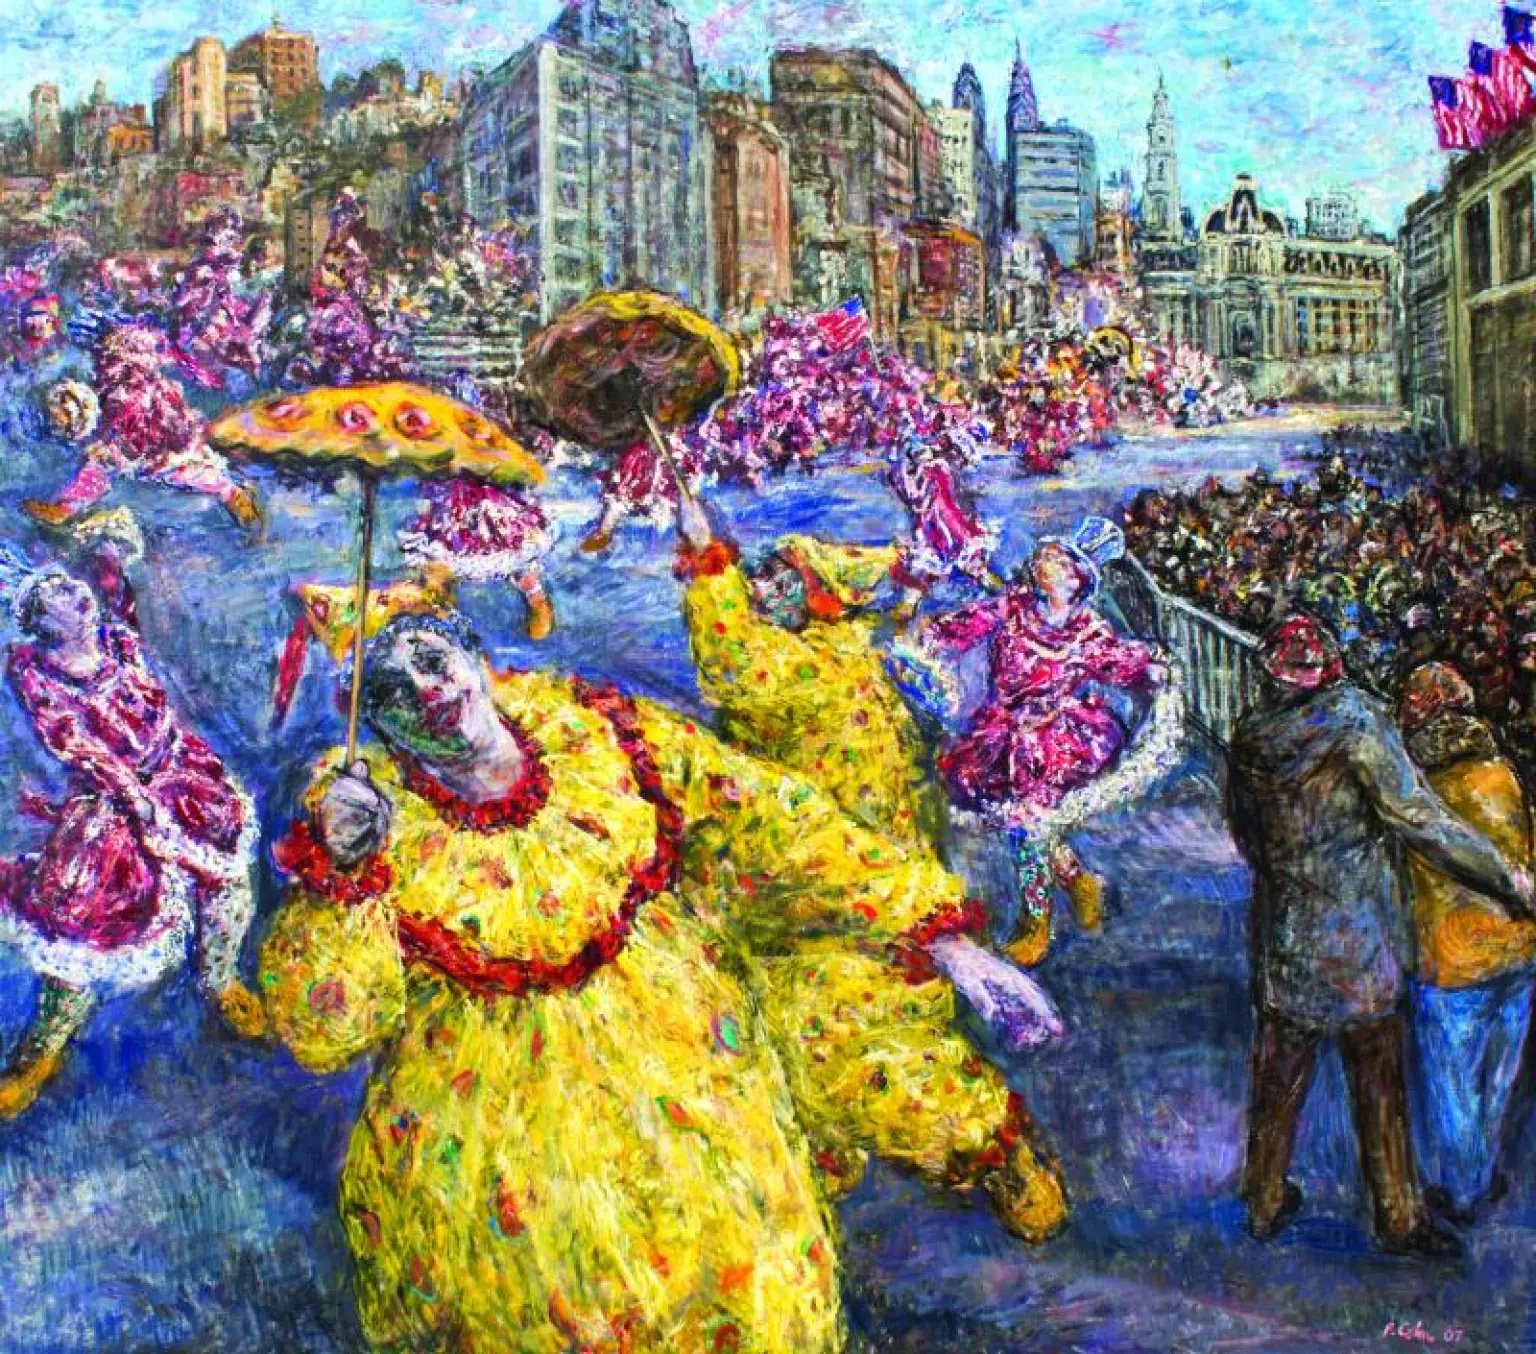   A Philip Cohn painting of the Philadelphia Mummers Parade | Courtesy of Michael Kalick  